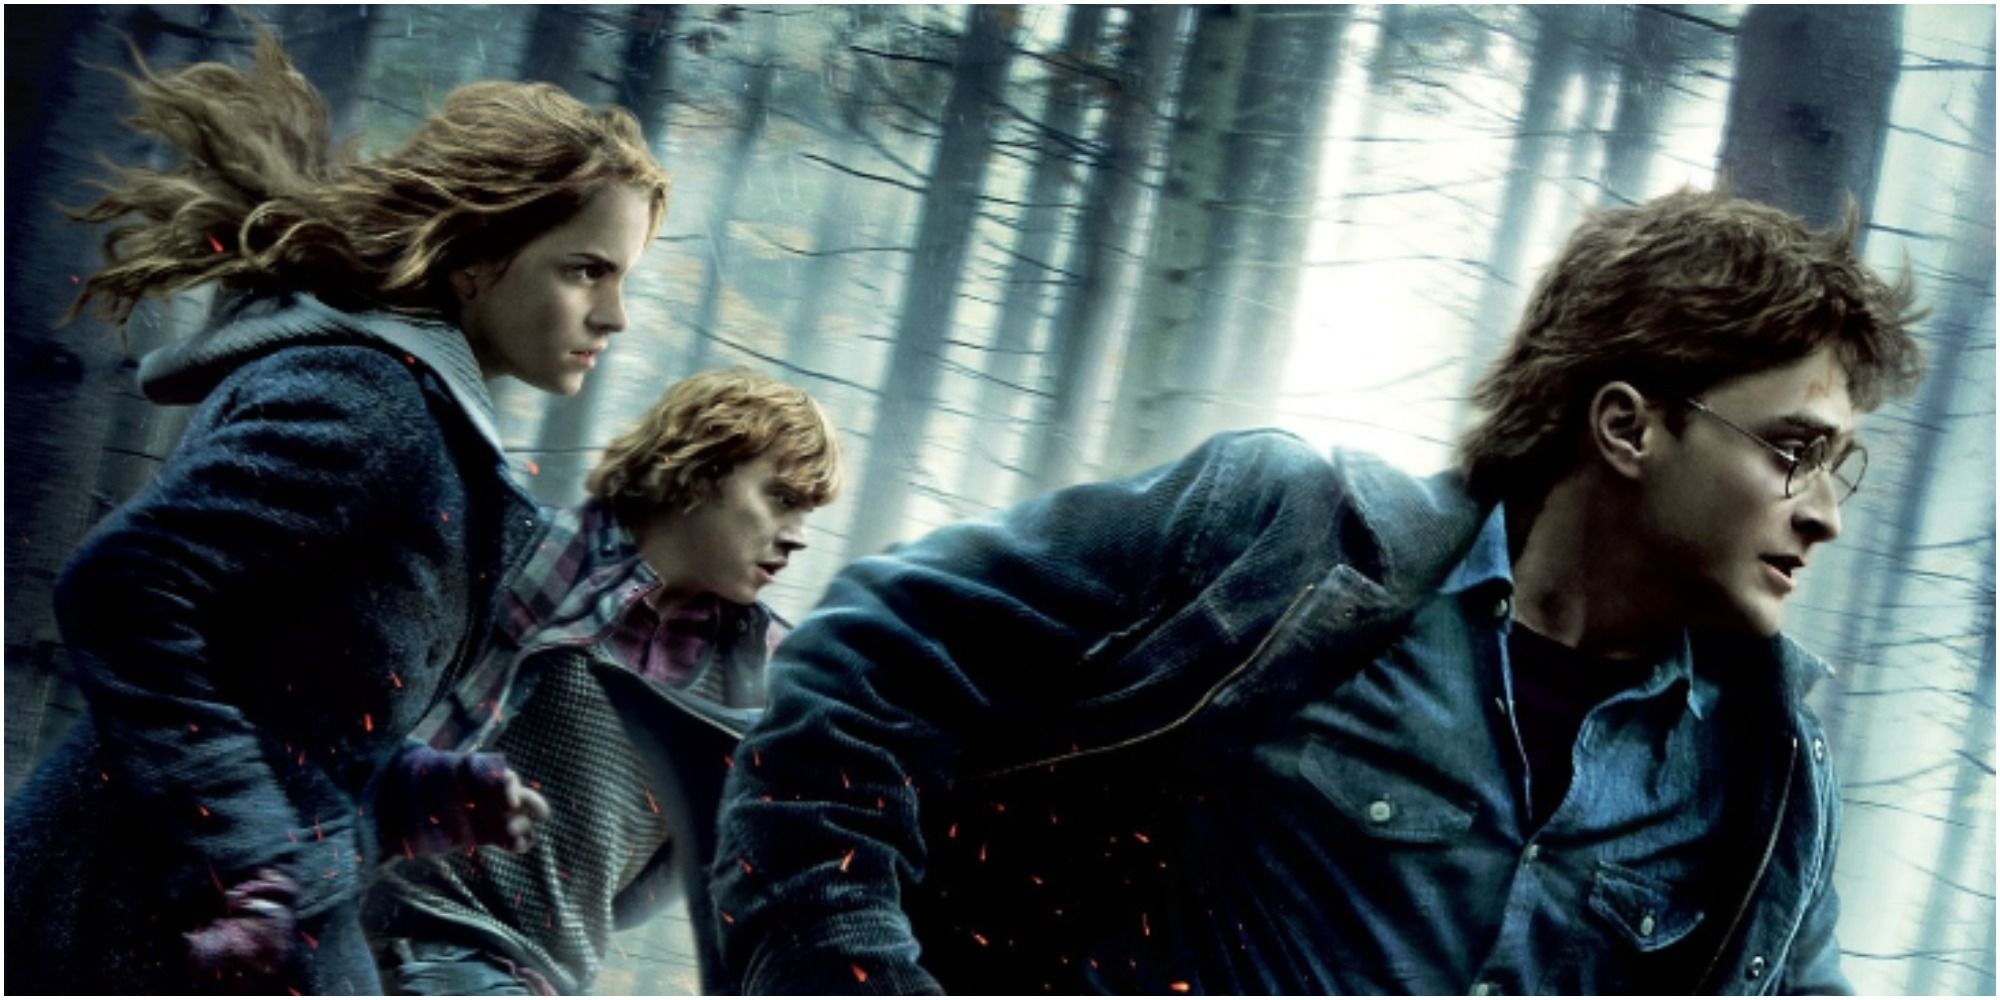 Danielle Radcliffe, Emma Watson and Rupert Grint running through the woods in a promotional poster for Harry Potter and the Deathly Hallows Part I